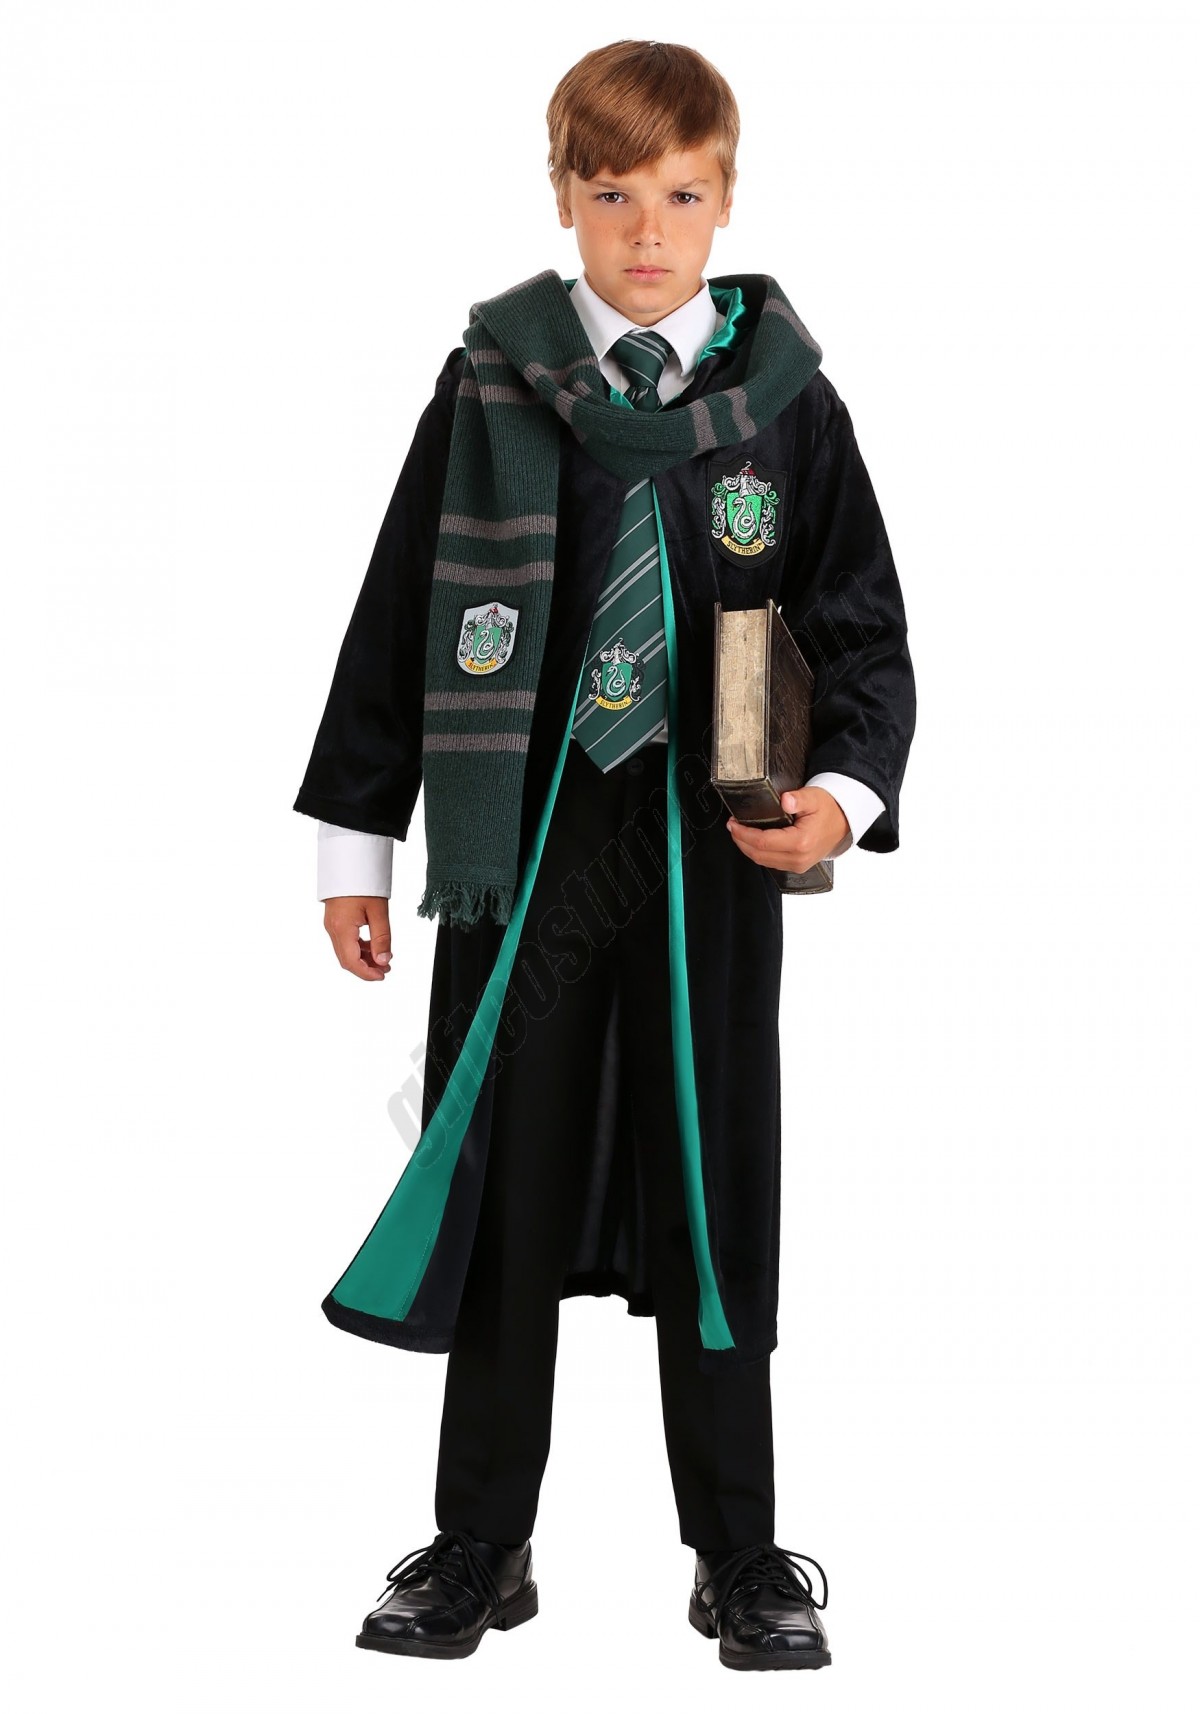 Harry Potter Kids Deluxe Slytherin Robe Costume Promotions - -0